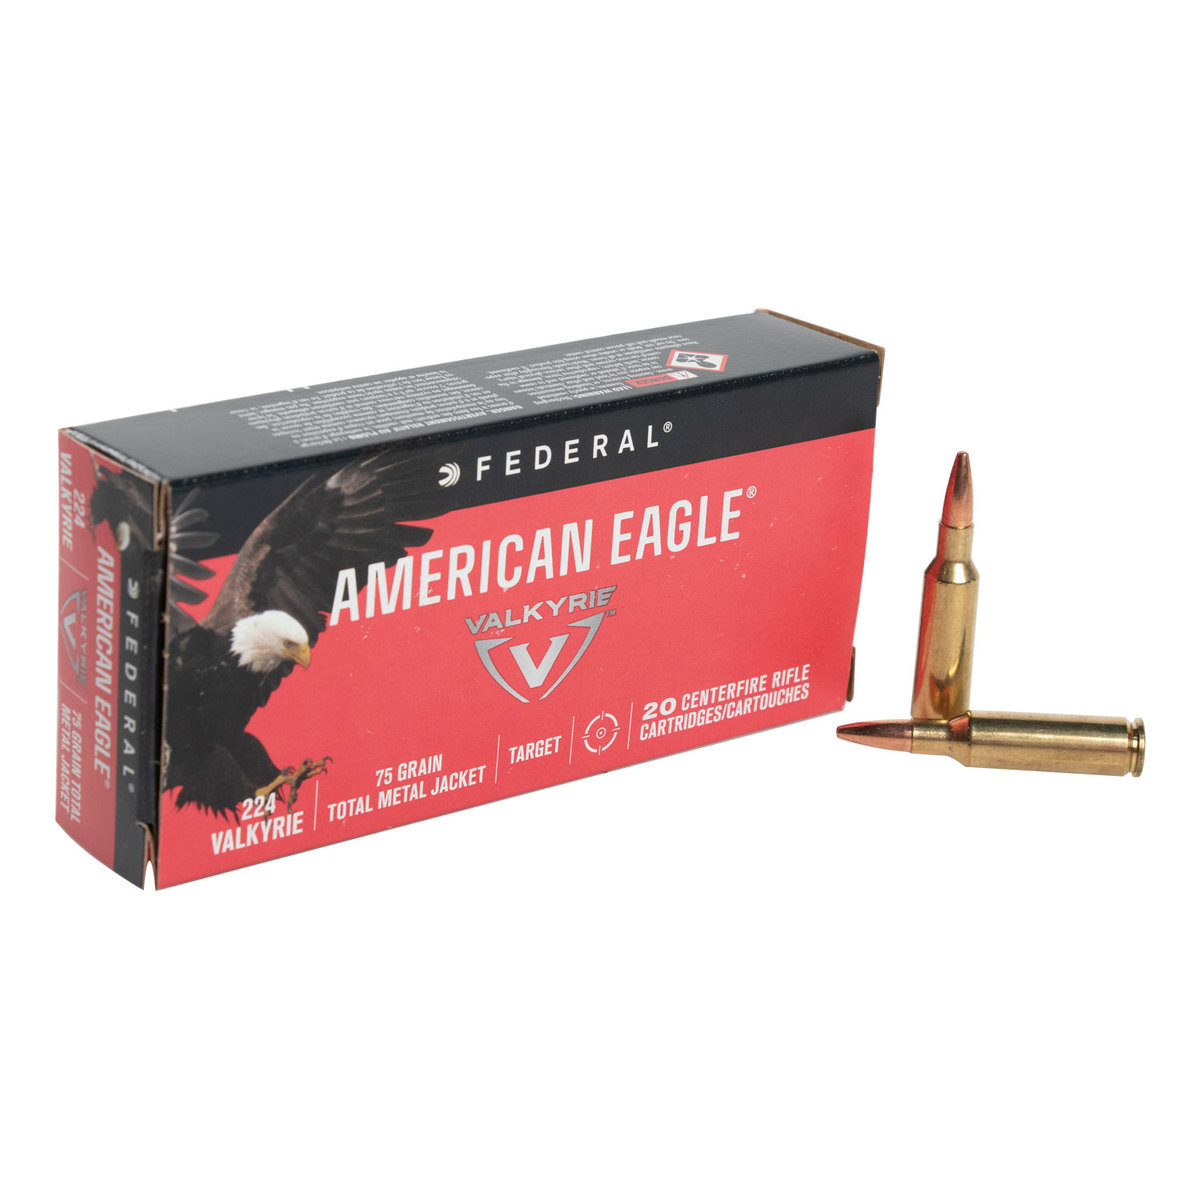 federal-american-eagle-224-valkyrie-75gr-tmj-rifle-ammo-20-rounds